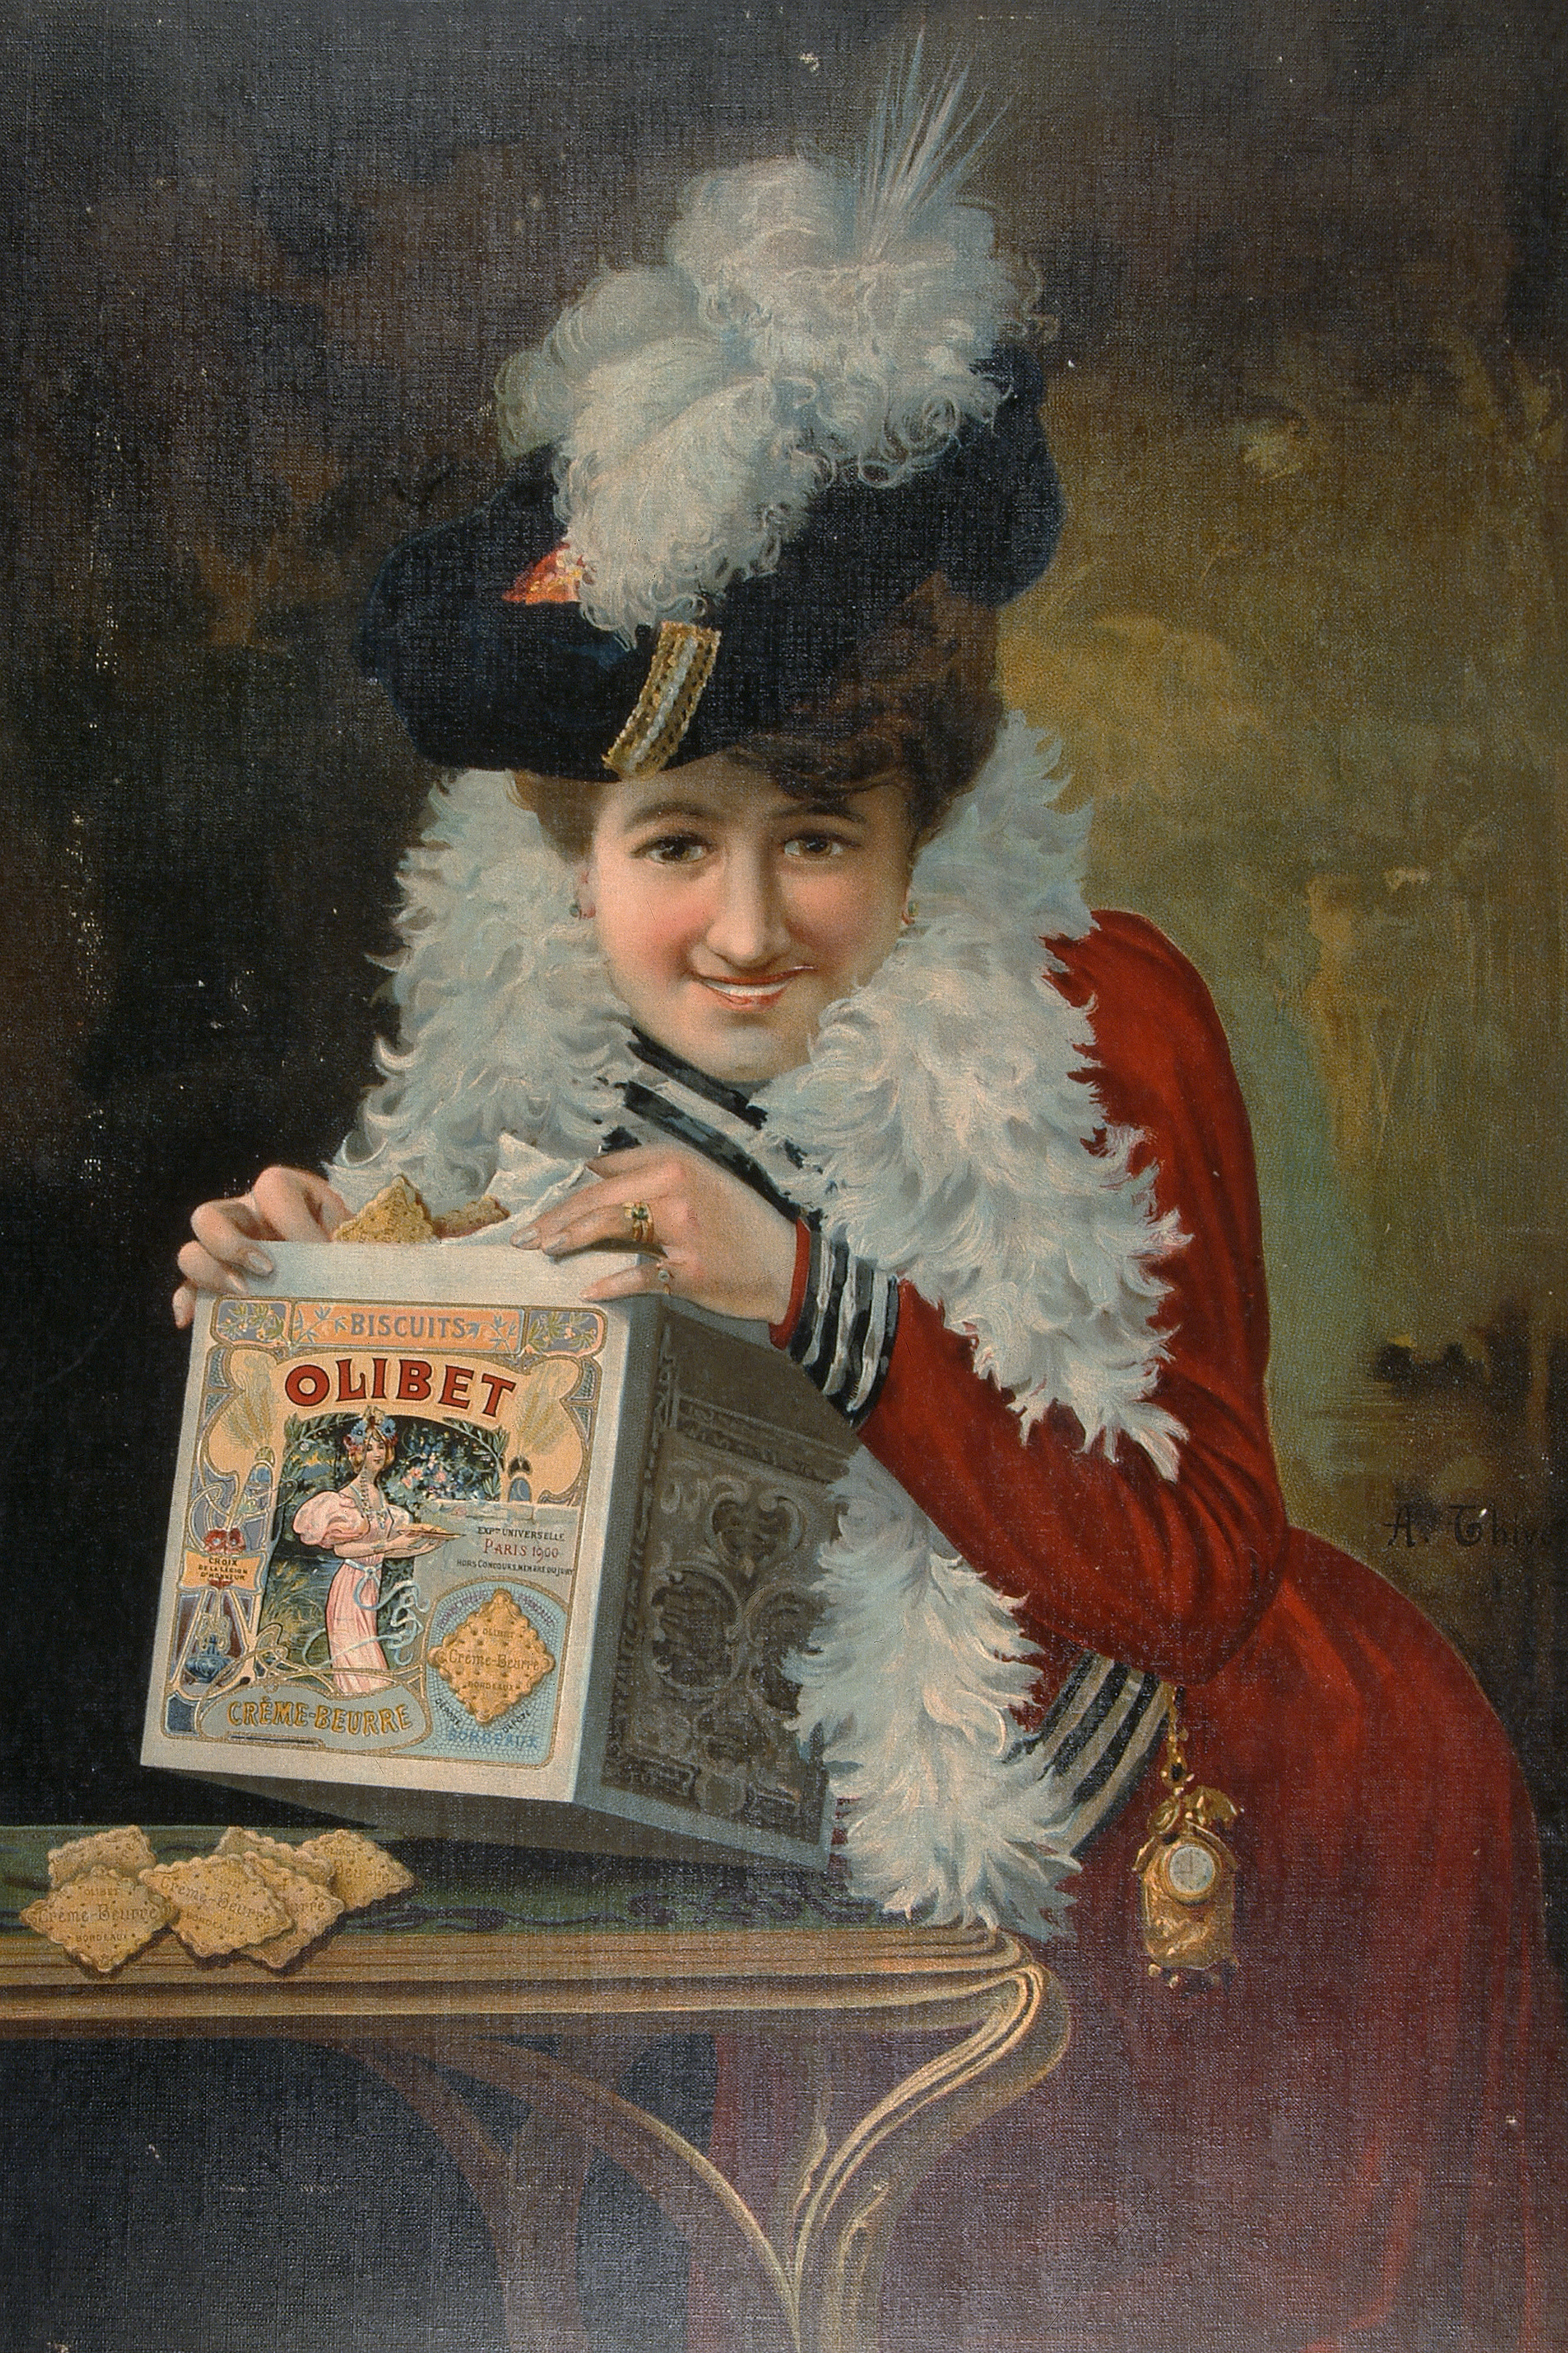 AFFICHE. PUB. ALIMENTAIRE. BISCUITS OLIBET.